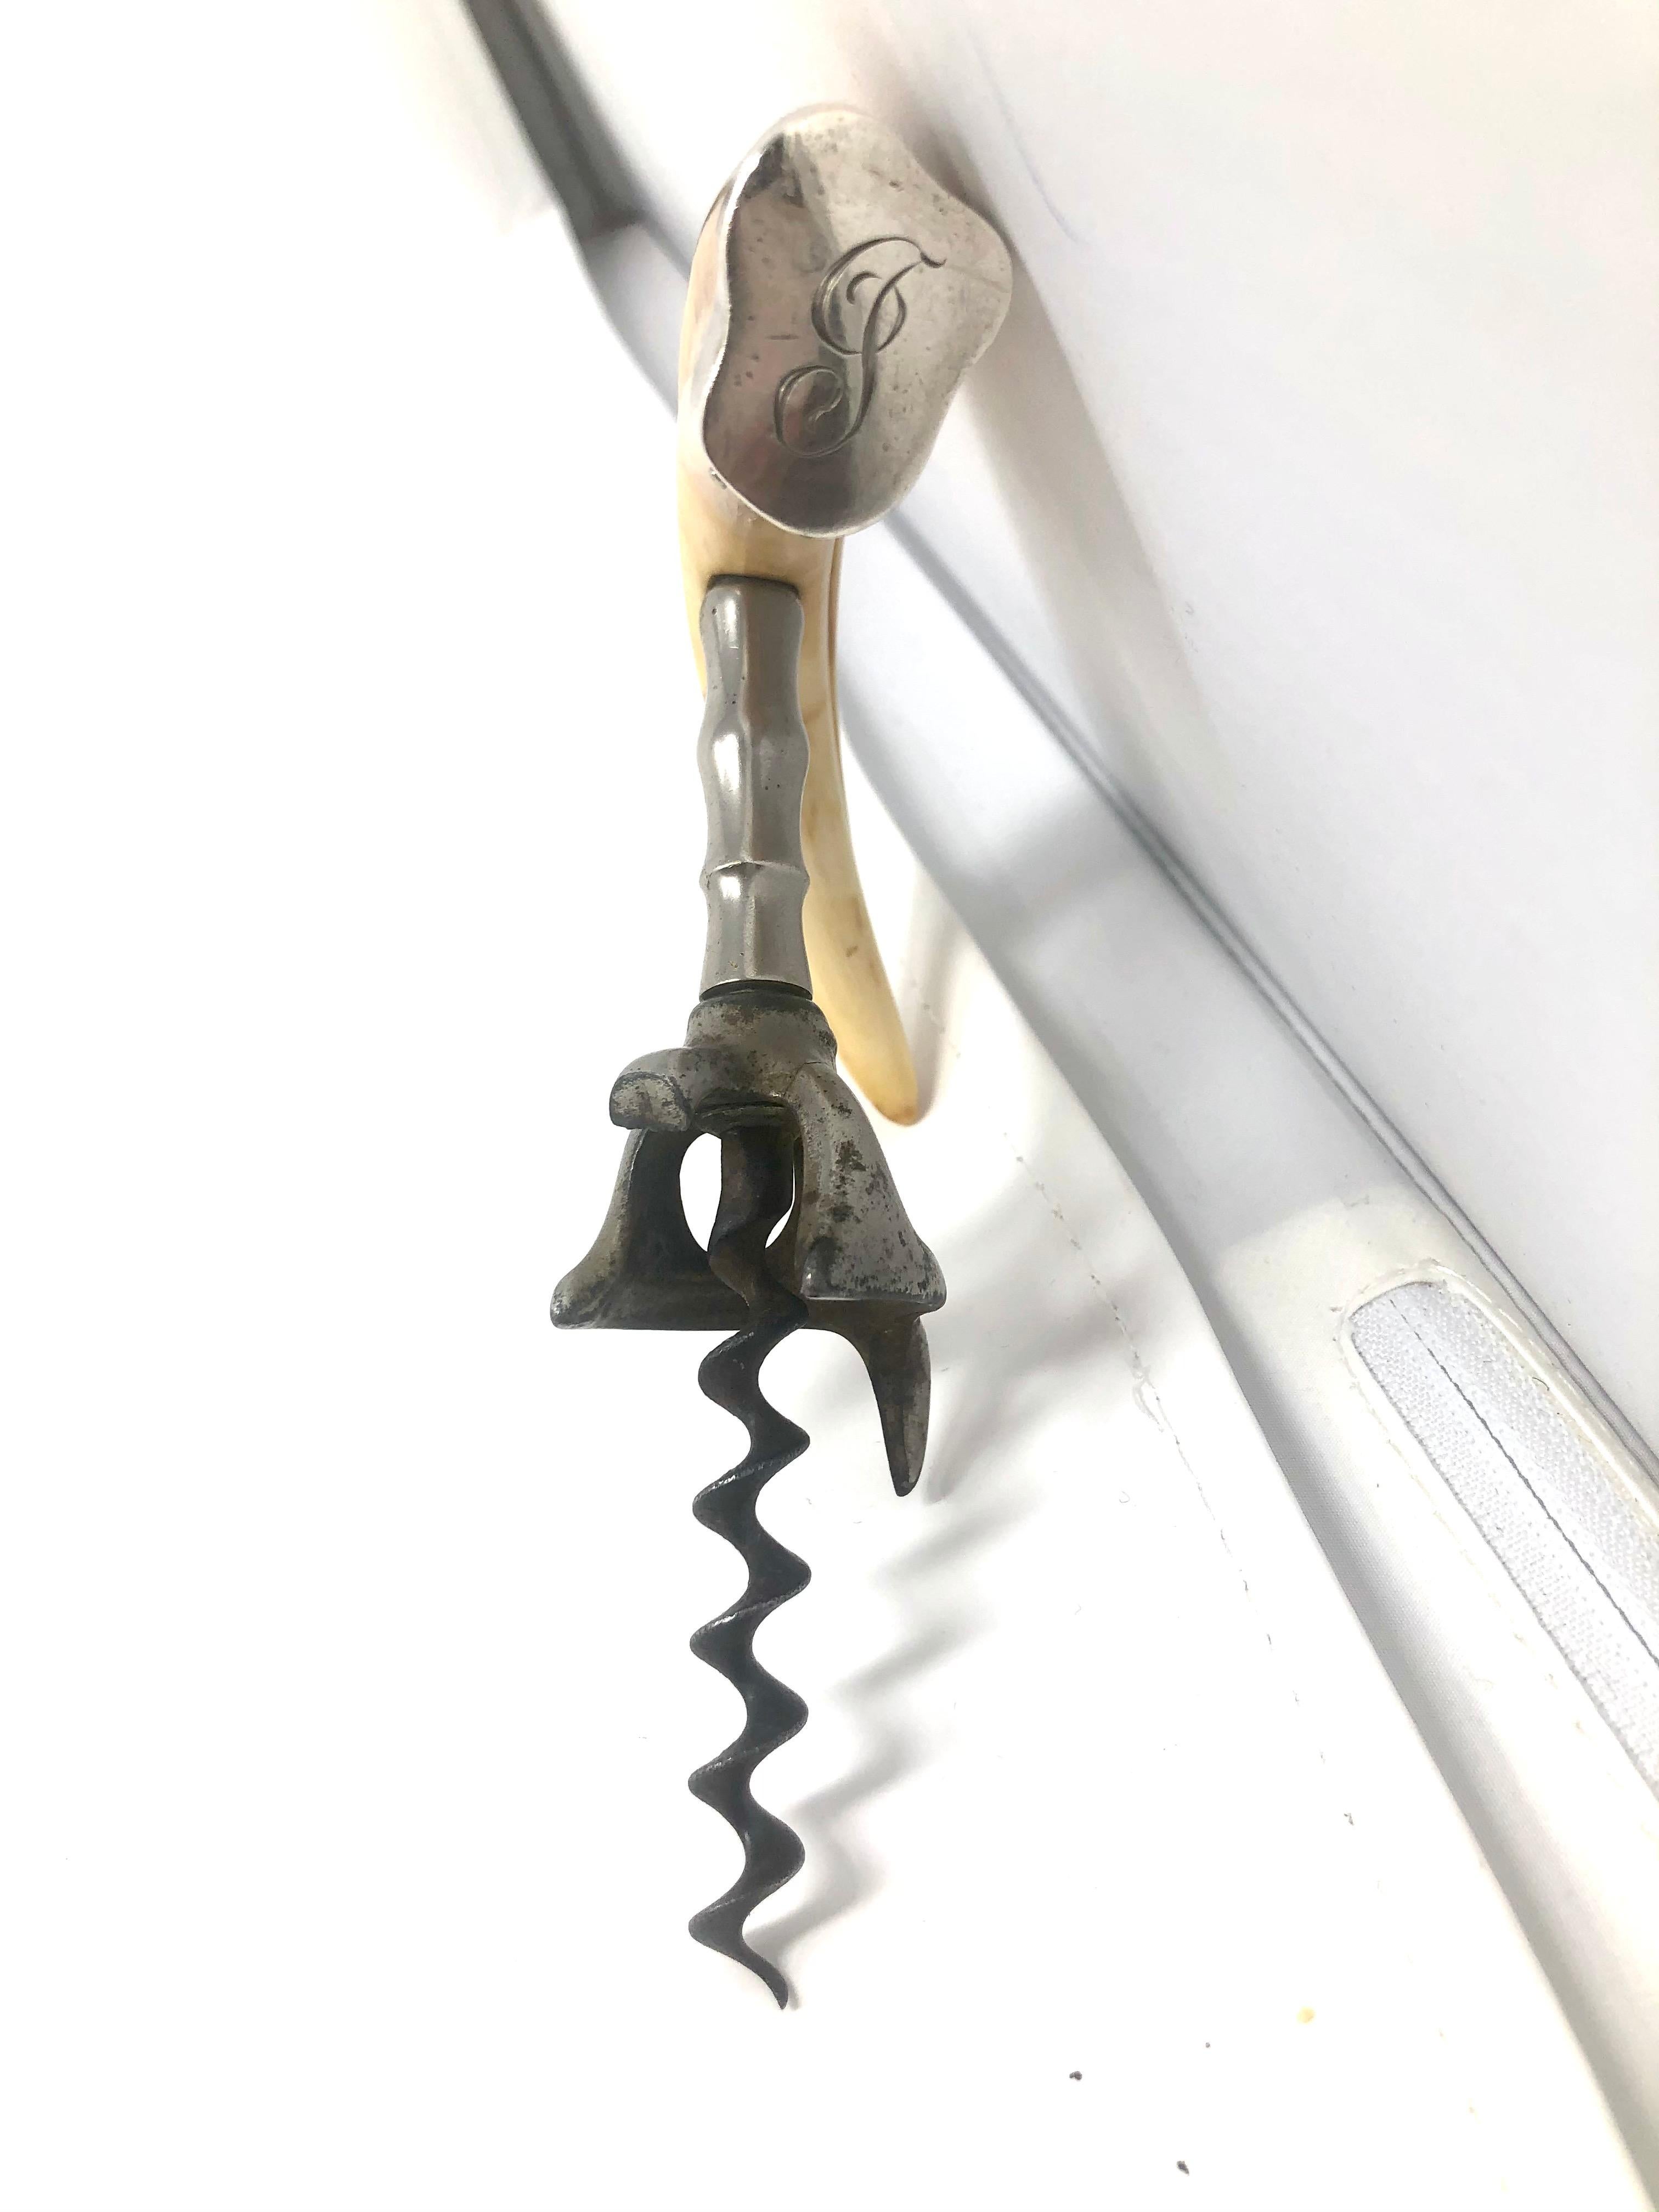 Unknown Antique Sterling Silver Mounted Boar's Tusk Corkscrew with Steel Blade